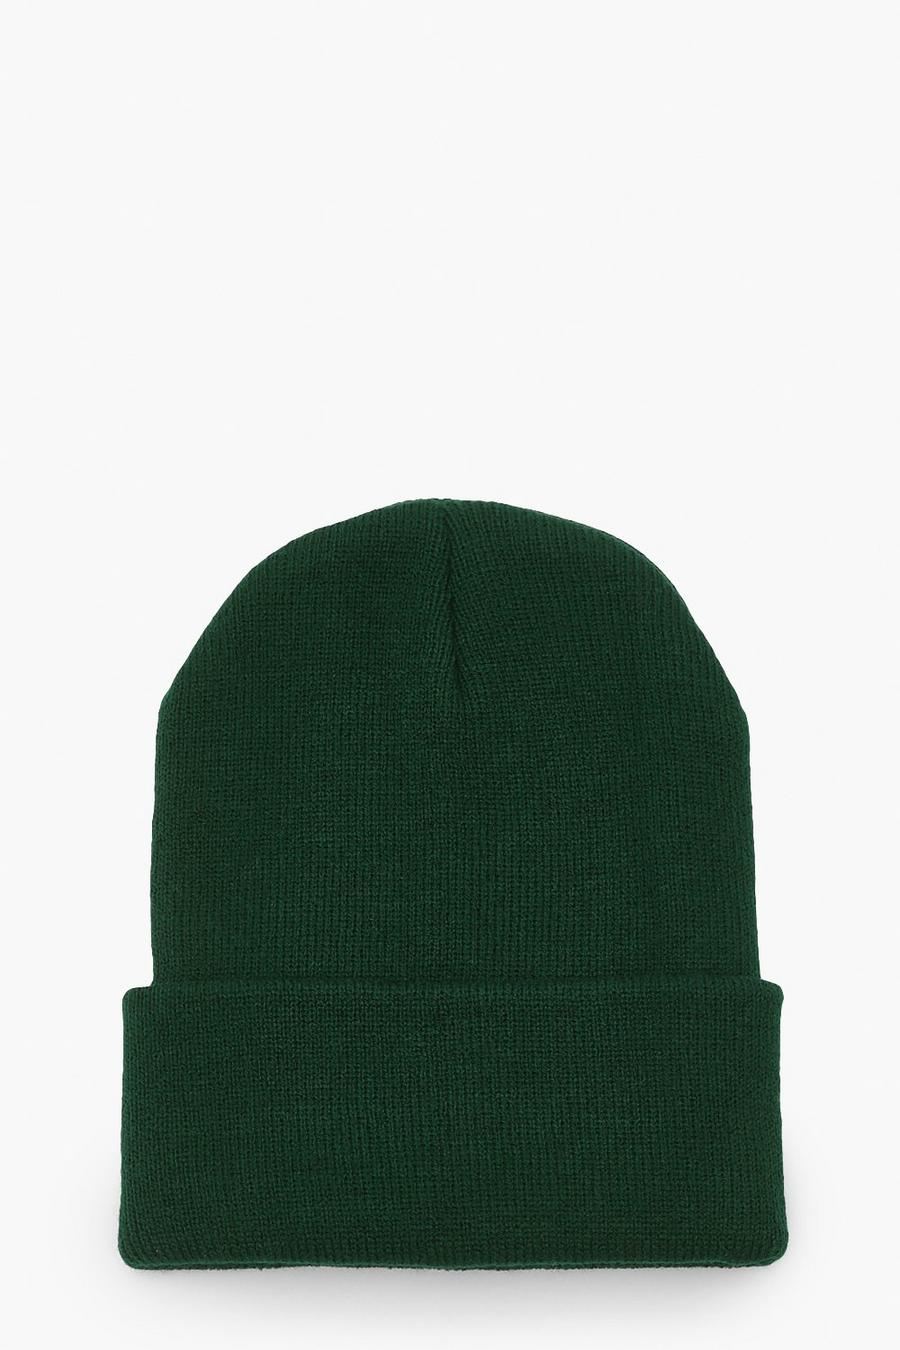 Green Beanie Hat image number 1